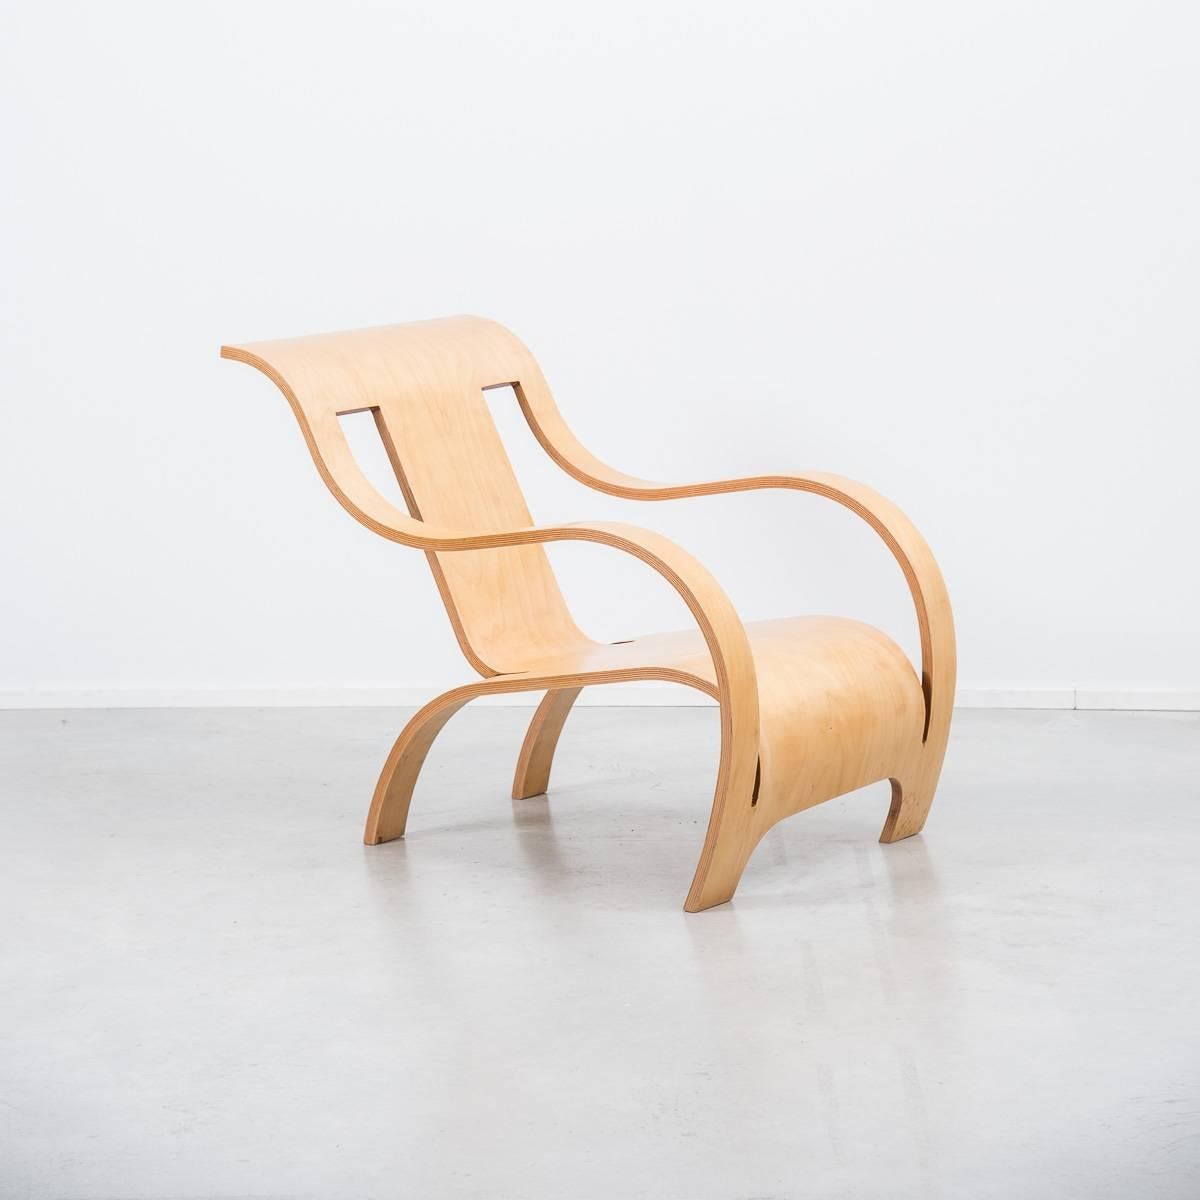 Designed in 1934 by Gerald Summers and originally manufactured by his London company, The Makers of Simple Furniture, the chair is made from a plywood sheet consisting of 13 layers of cross-grained veneer. The sheet is cut with four straight lines,